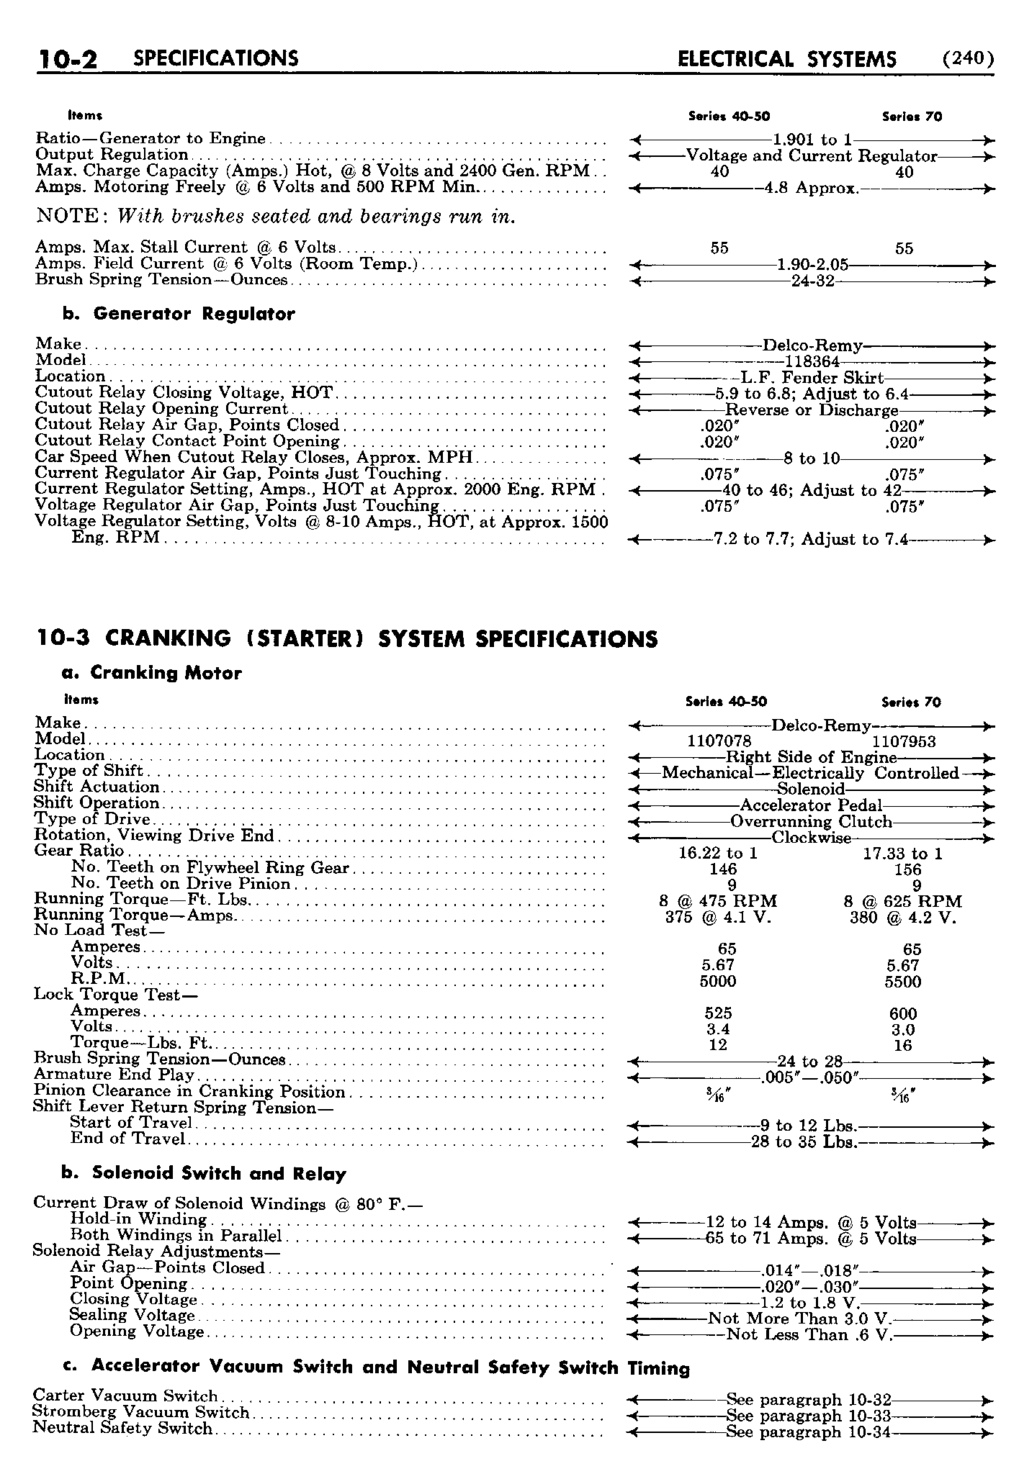 n_11 1950 Buick Shop Manual - Electrical Systems-002-002.jpg